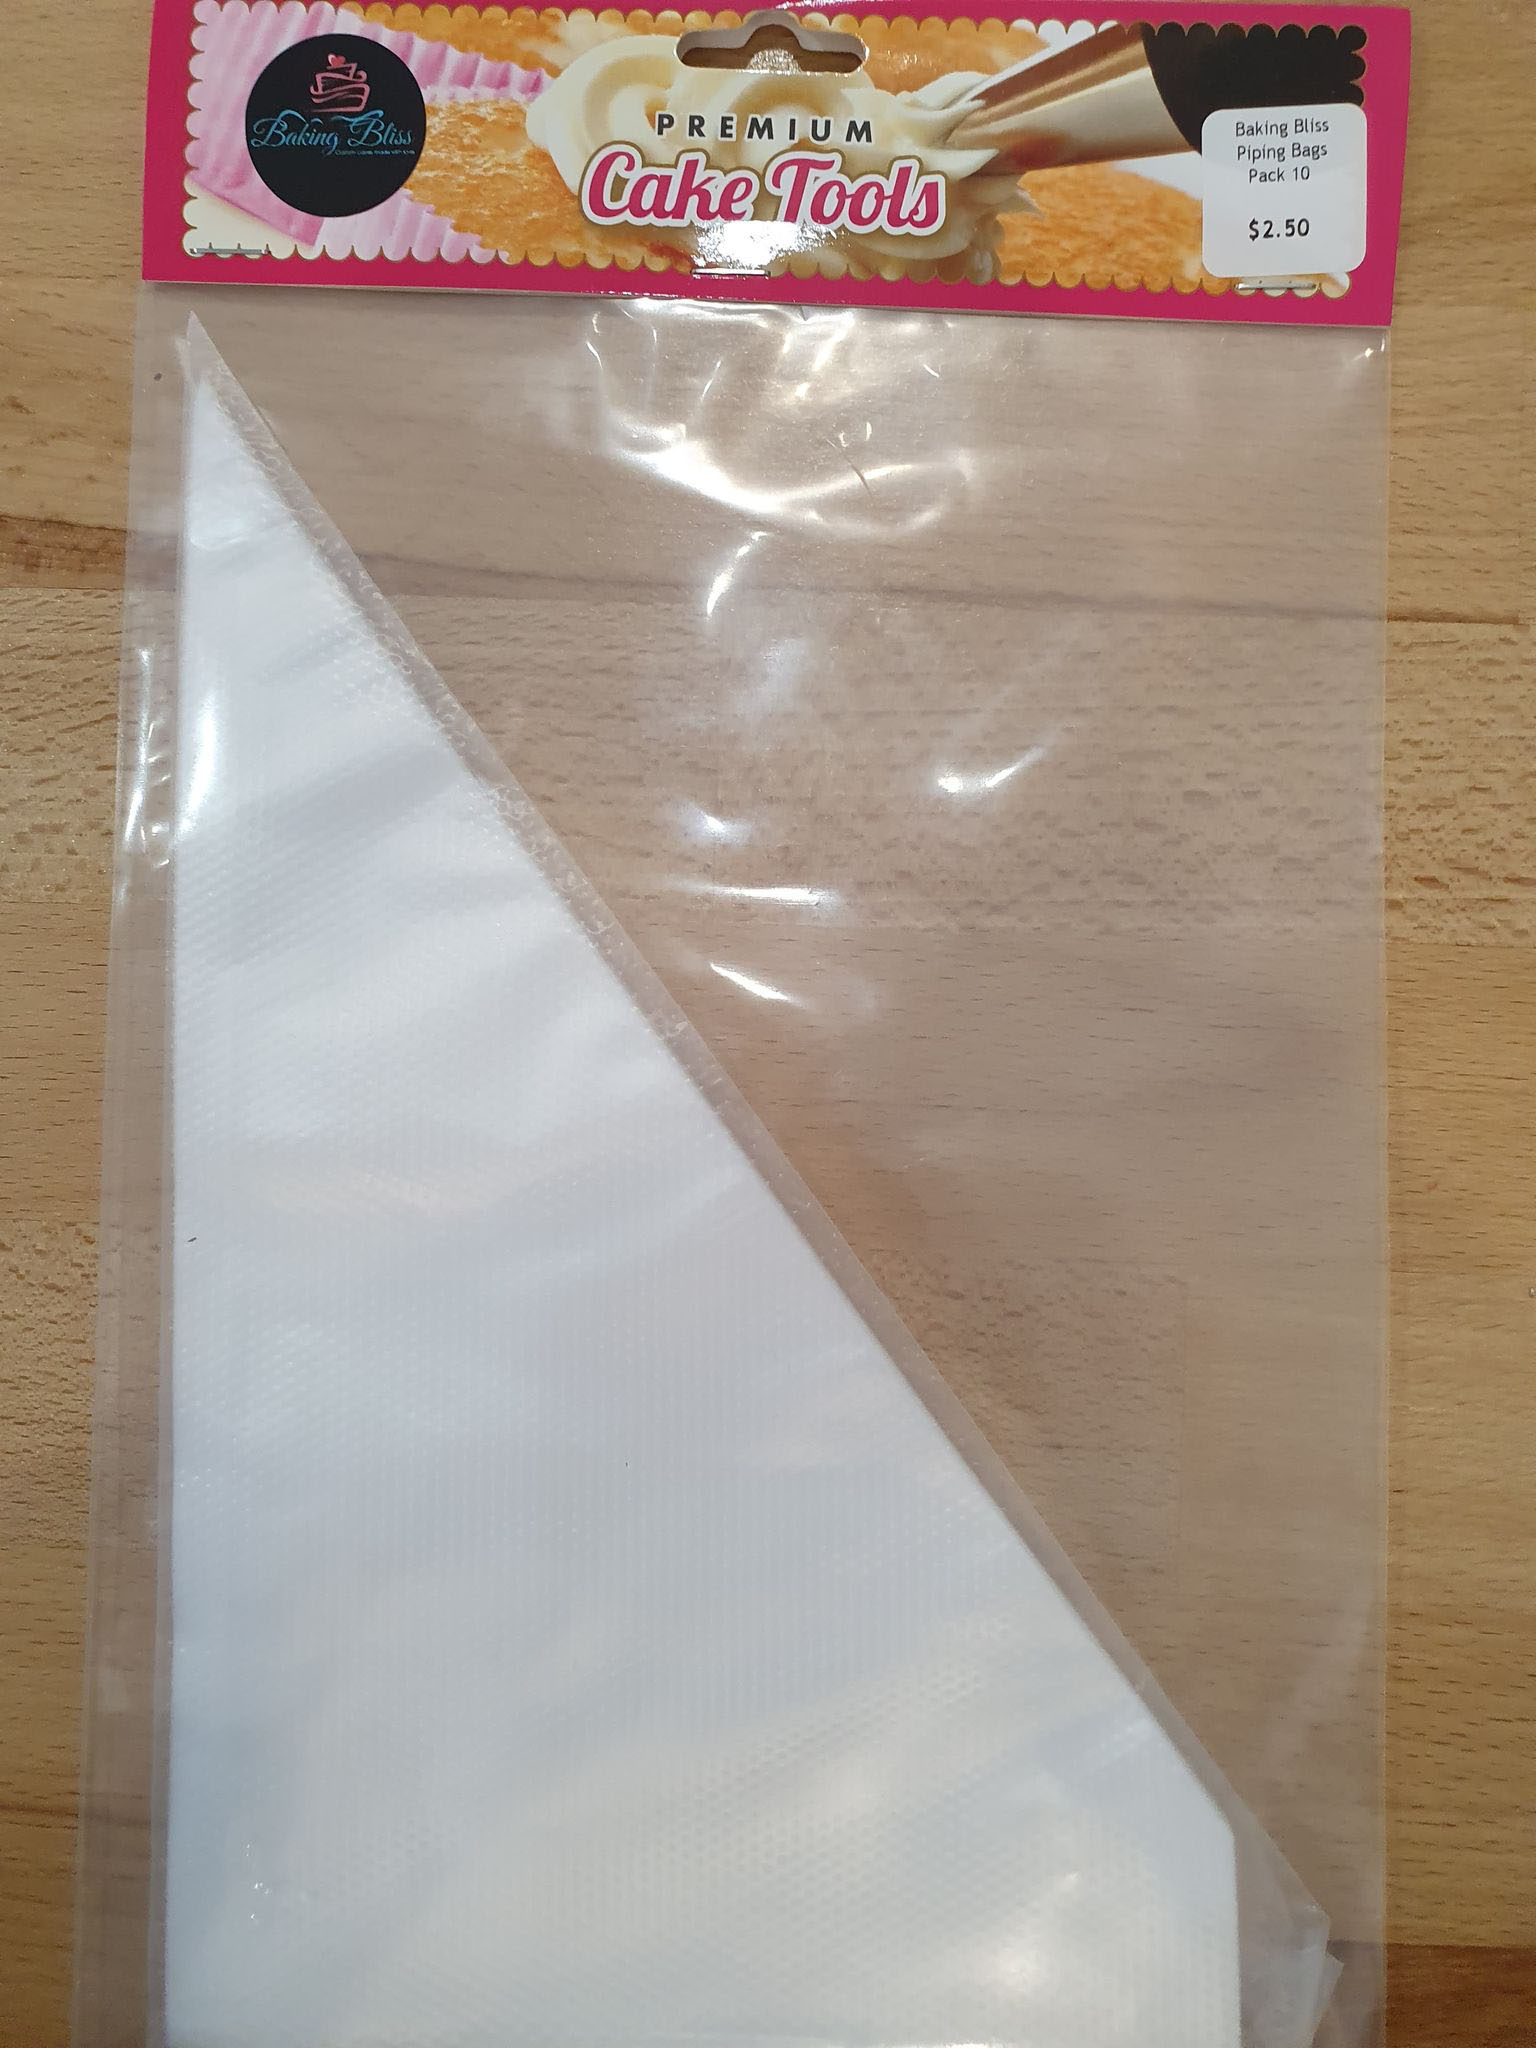 Piping Bags 10" pkt 10